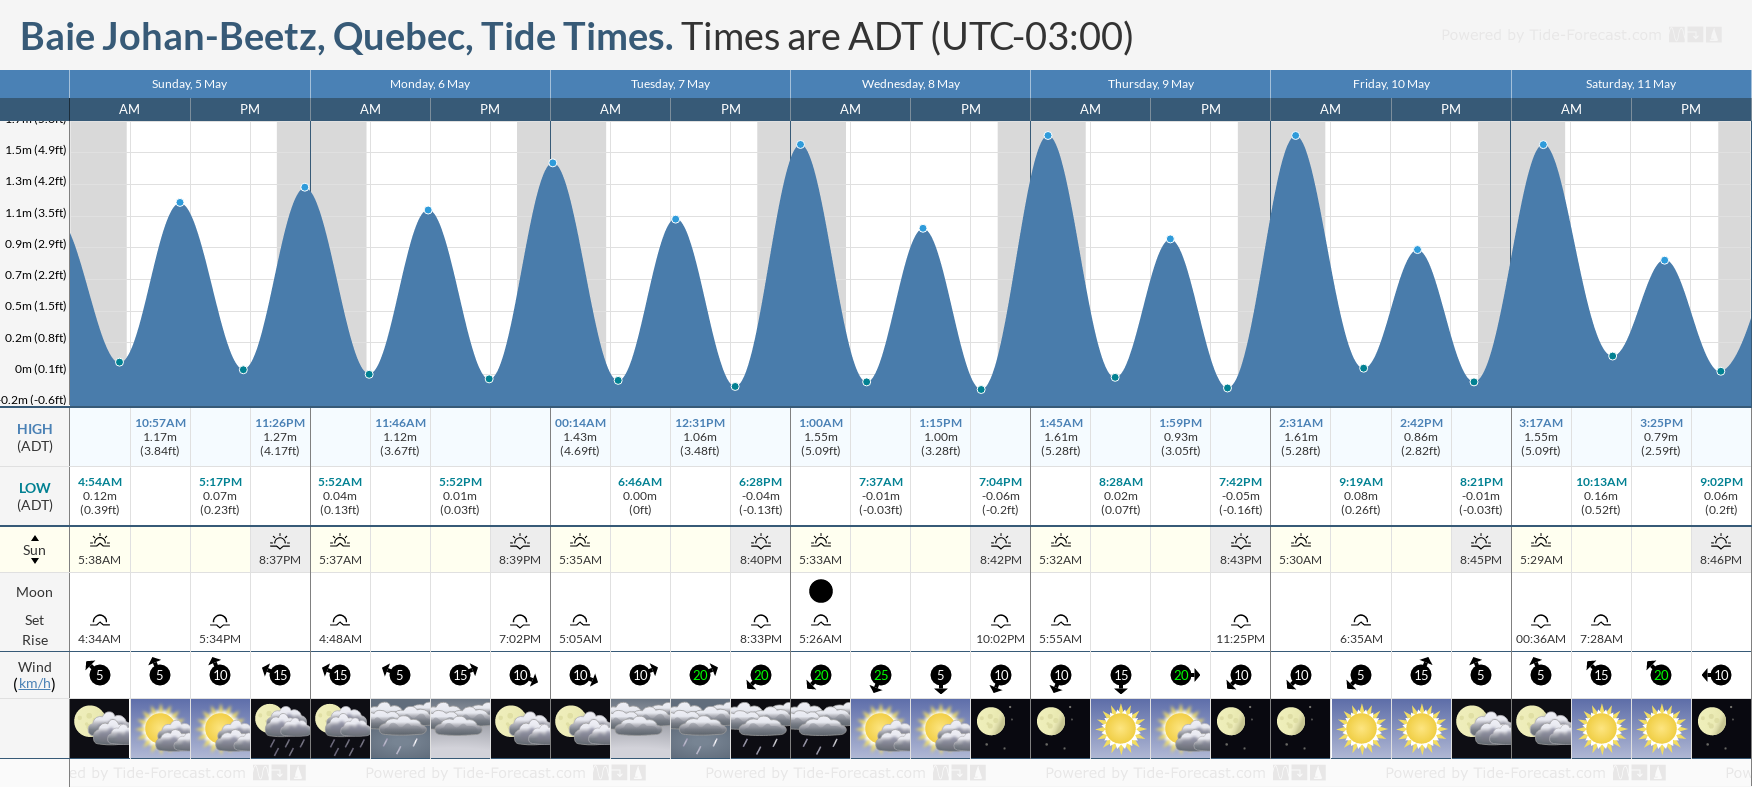 Baie Johan-Beetz, Quebec Tide Chart including high and low tide tide times for the next 7 days